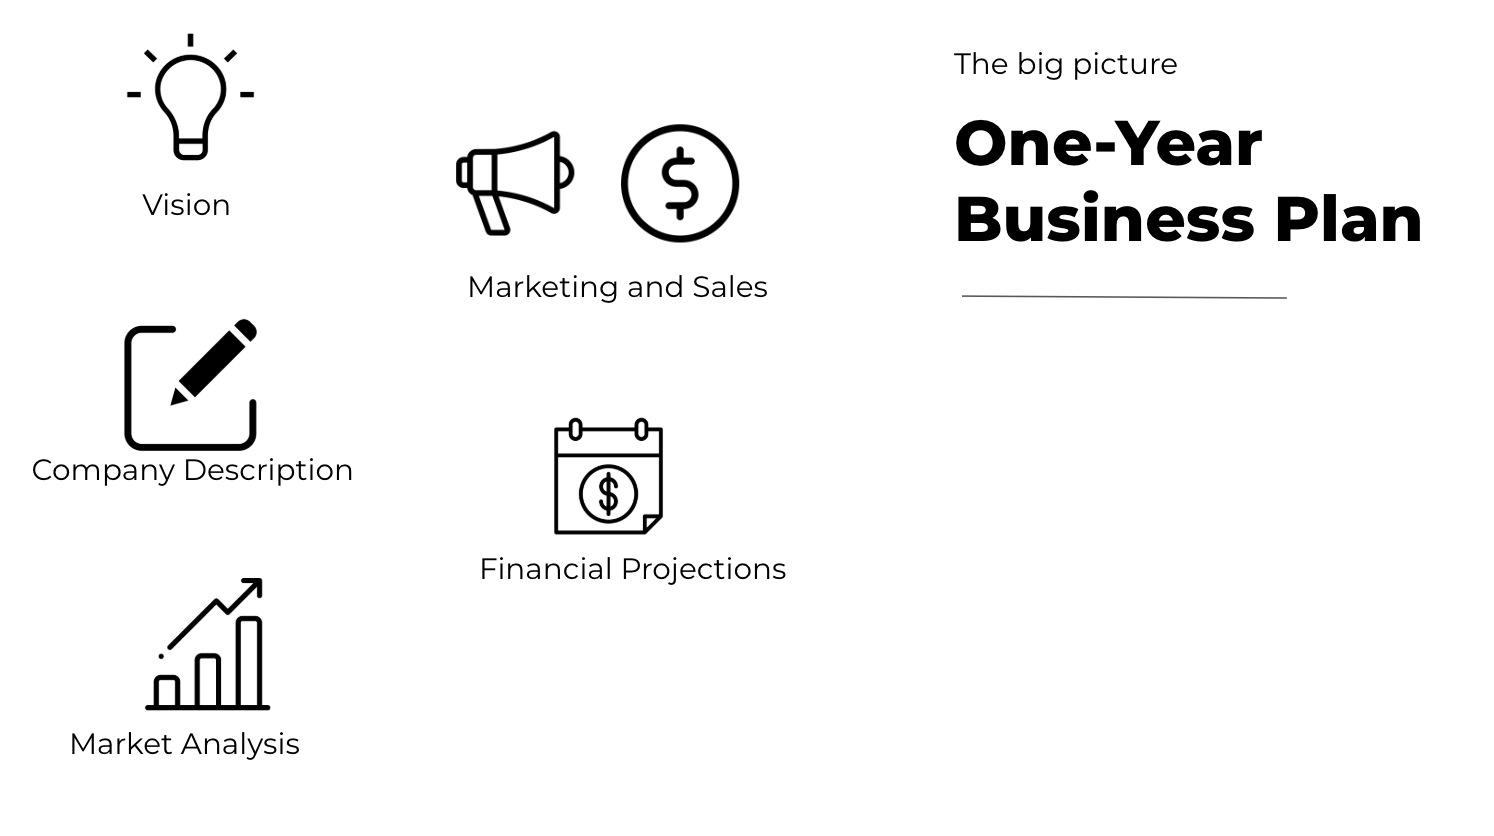 One year business plan